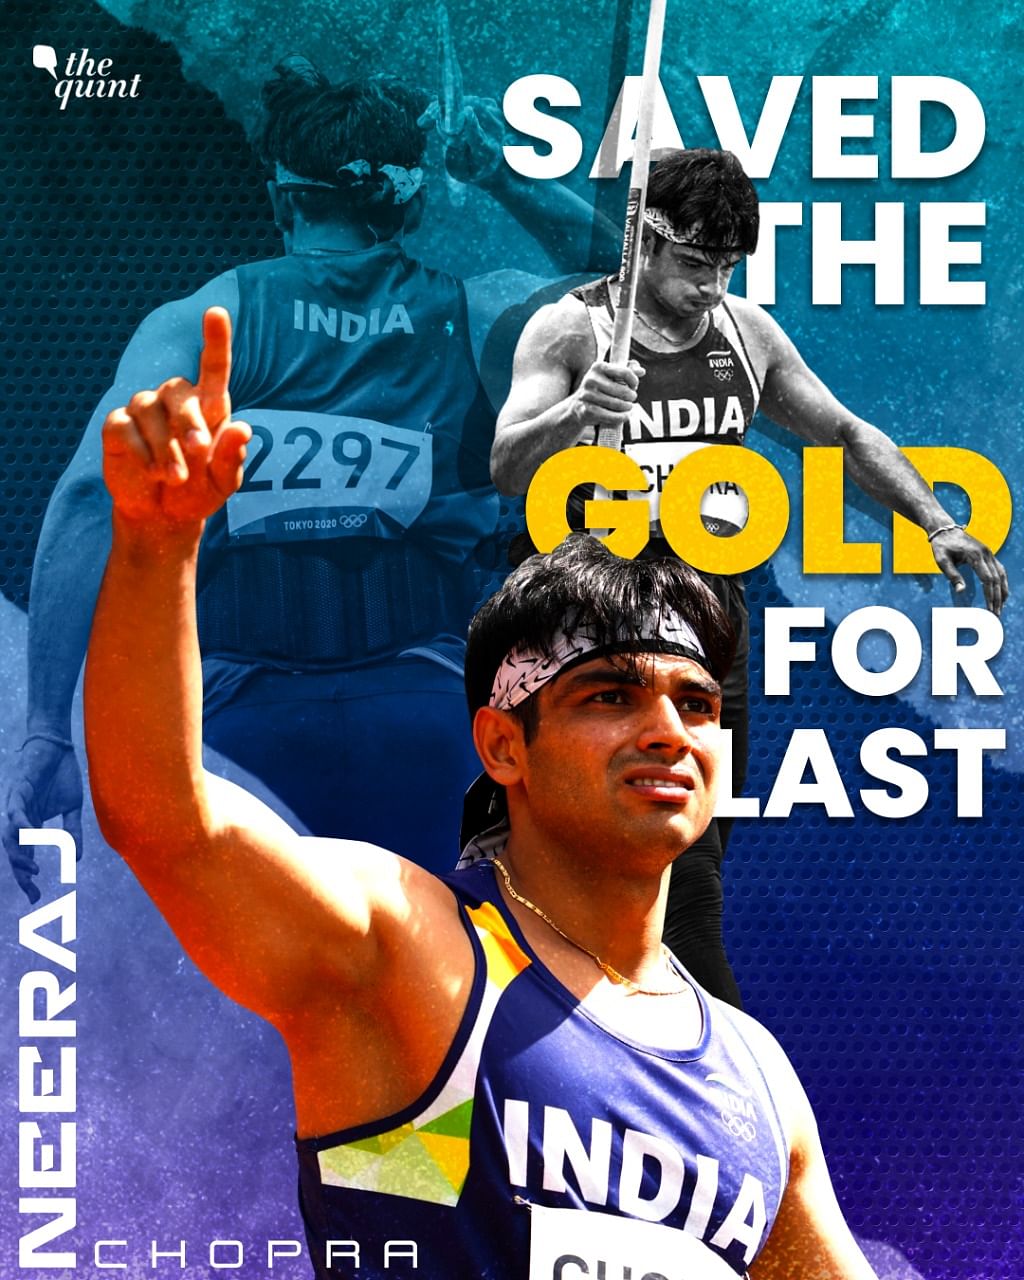 Neeraj Chopra created history after winning first athletics gold for India in Olympics.